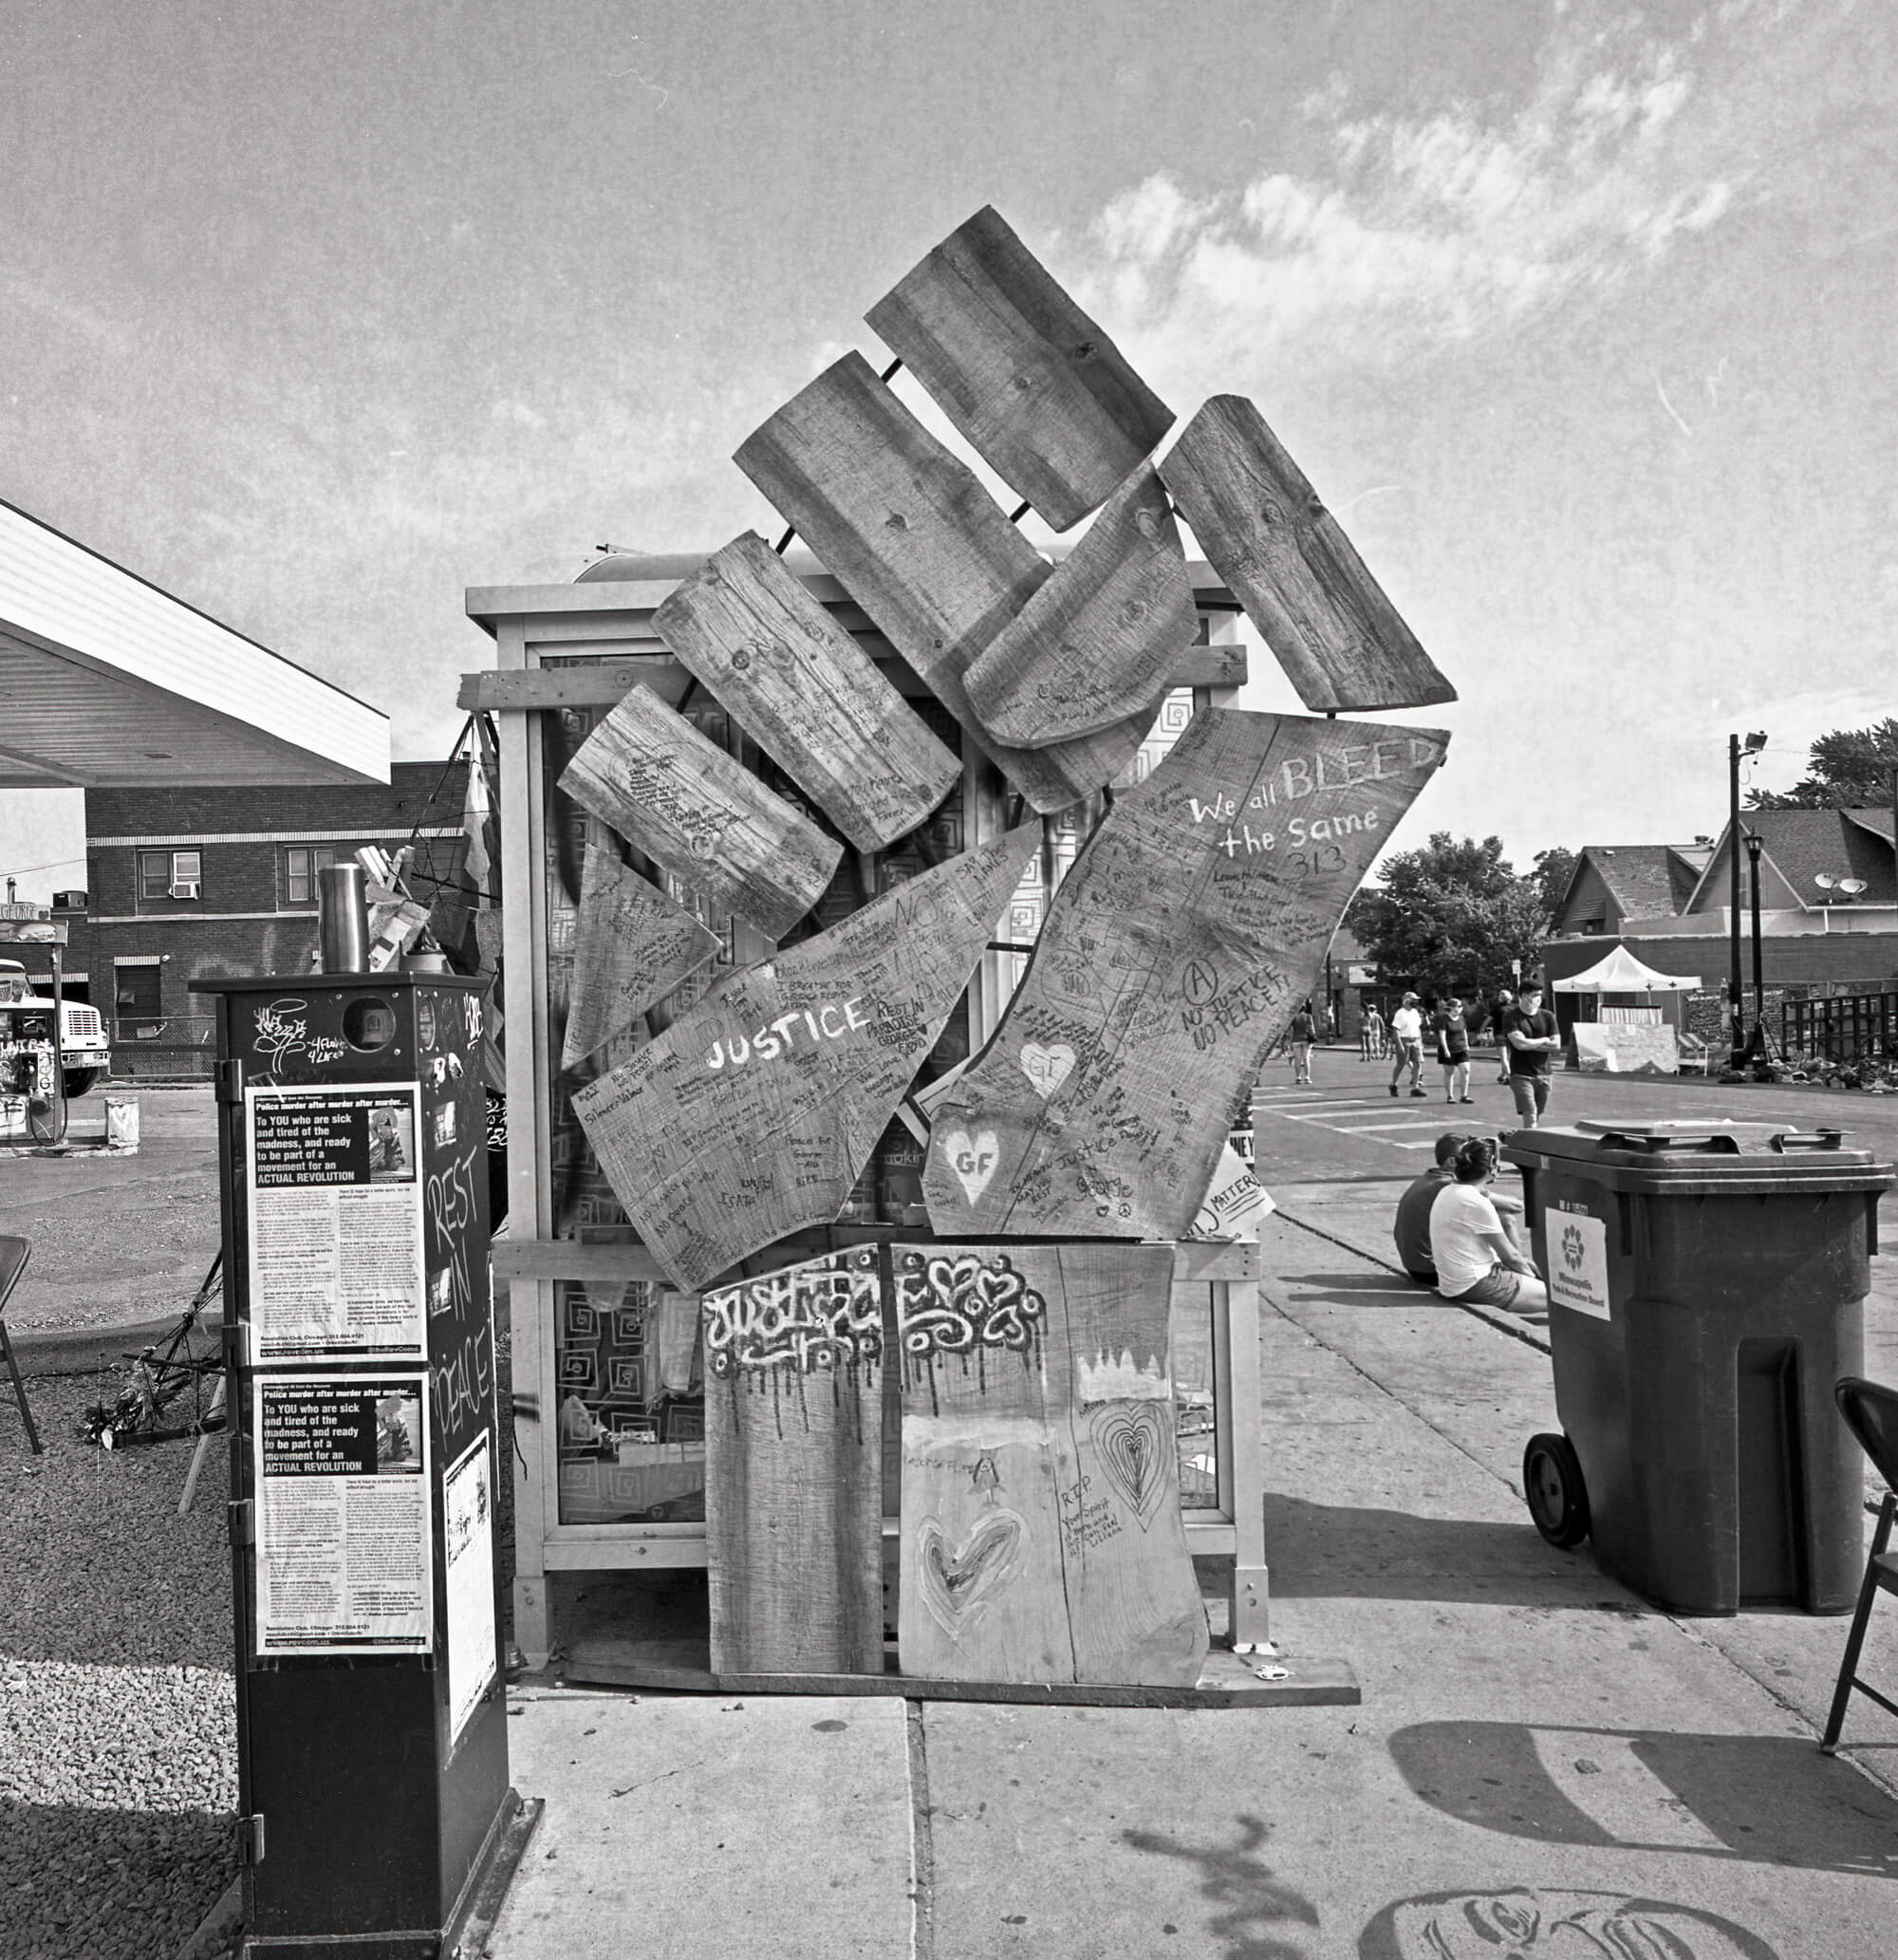 A wooden fist sculpture in Minneapolis, in tribute to George Floyd